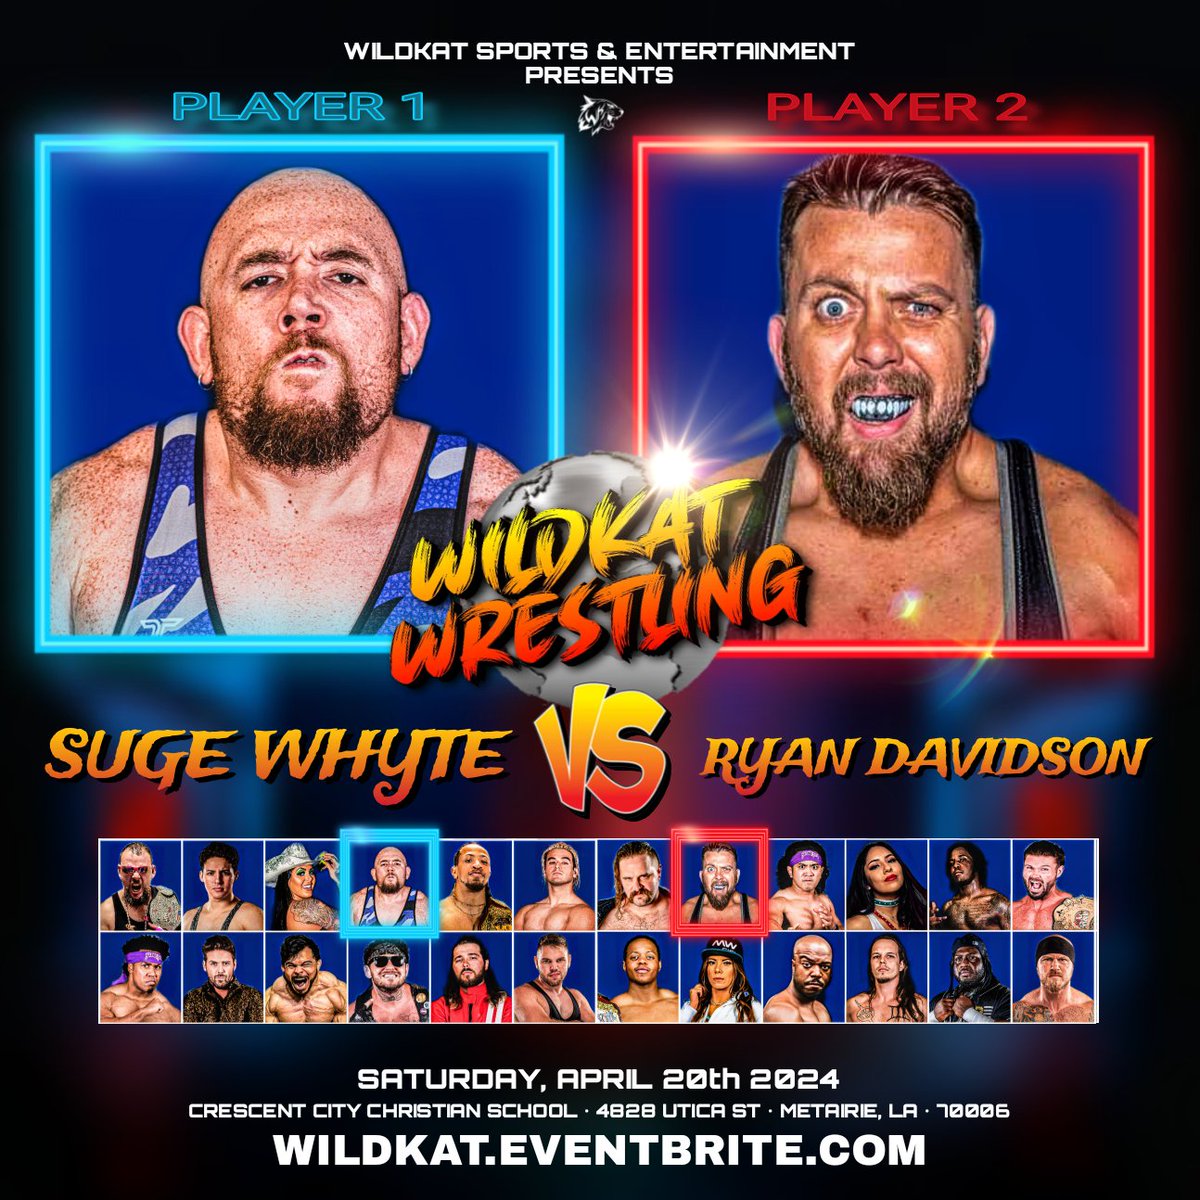 ⚠️*MATCH ANNOUNCEMENT*⚠️ The first official match for @WildKatSports on April 20th will see a collision between the imposing @Samoanpearl and Grizzled @RDBEAR57 Visit WILDKAT.EVENTBRITE.COM 🎟